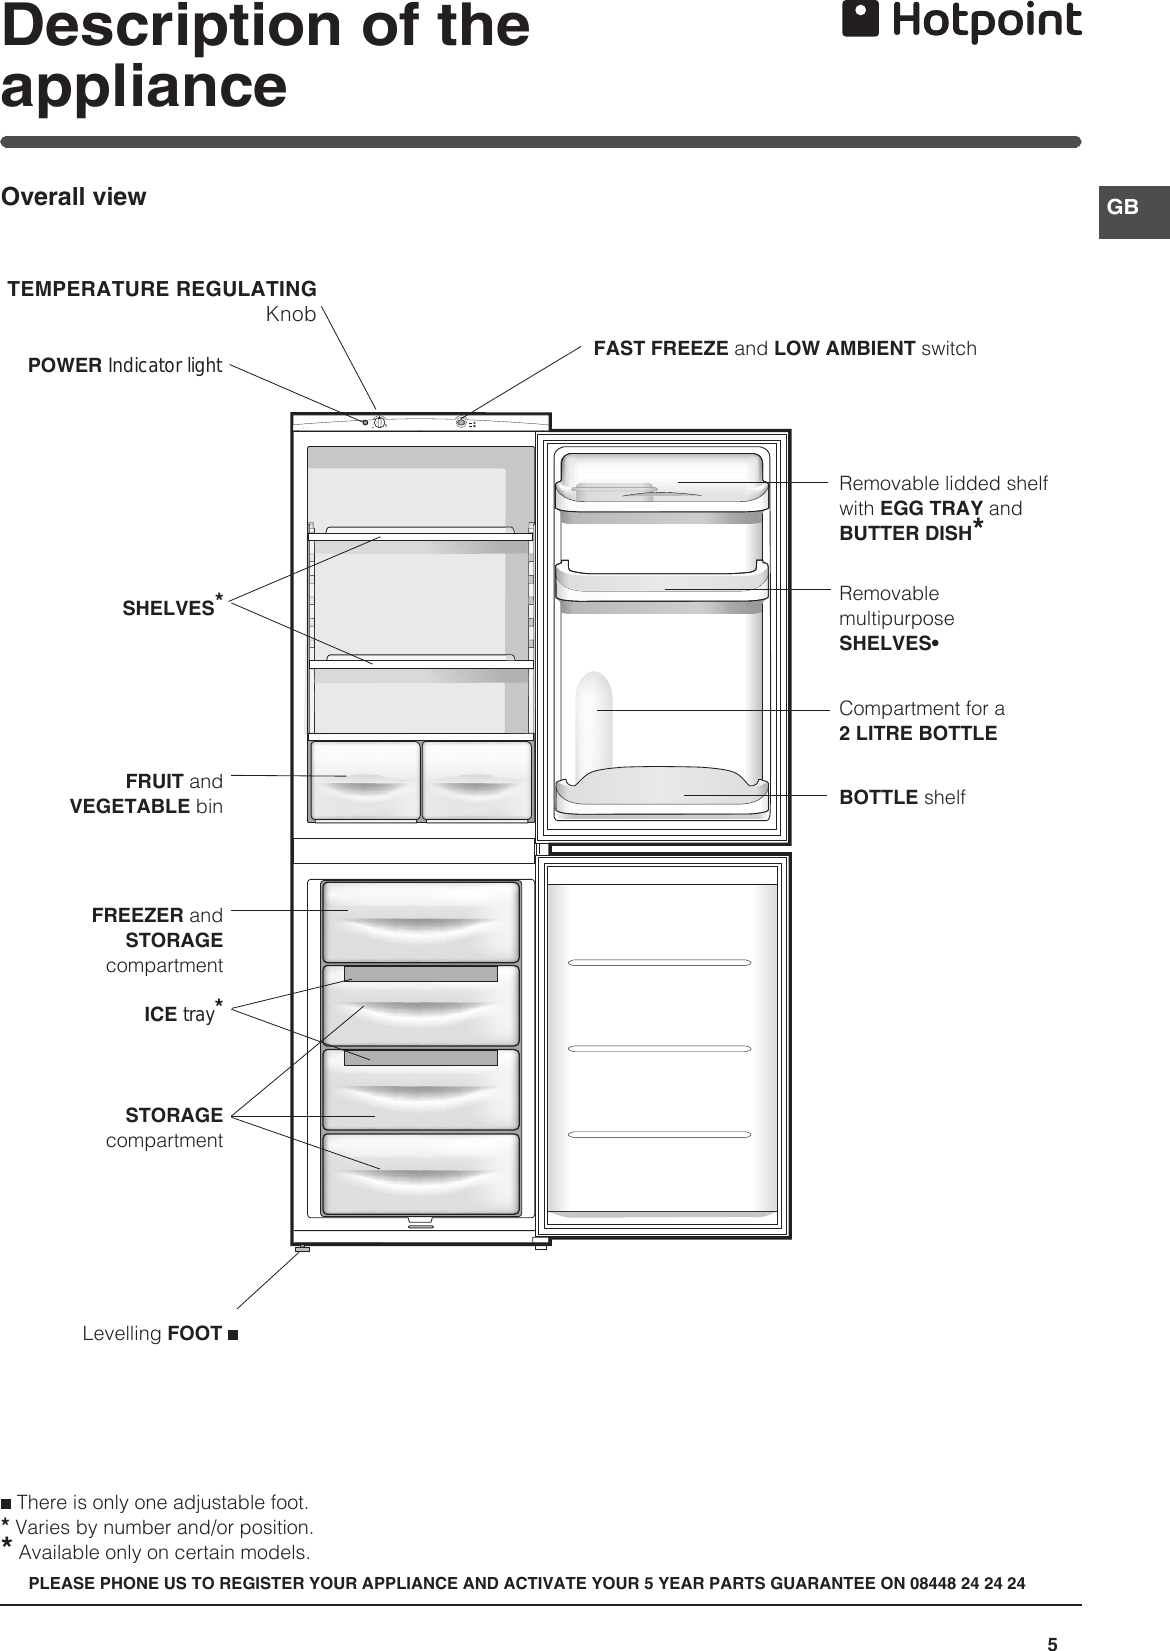 Page 5 of 12 - Hotpoint Hotpoint-Refrigerator-Ffa52X-Users-Manual-  Hotpoint-refrigerator-ffa52x-users-manual